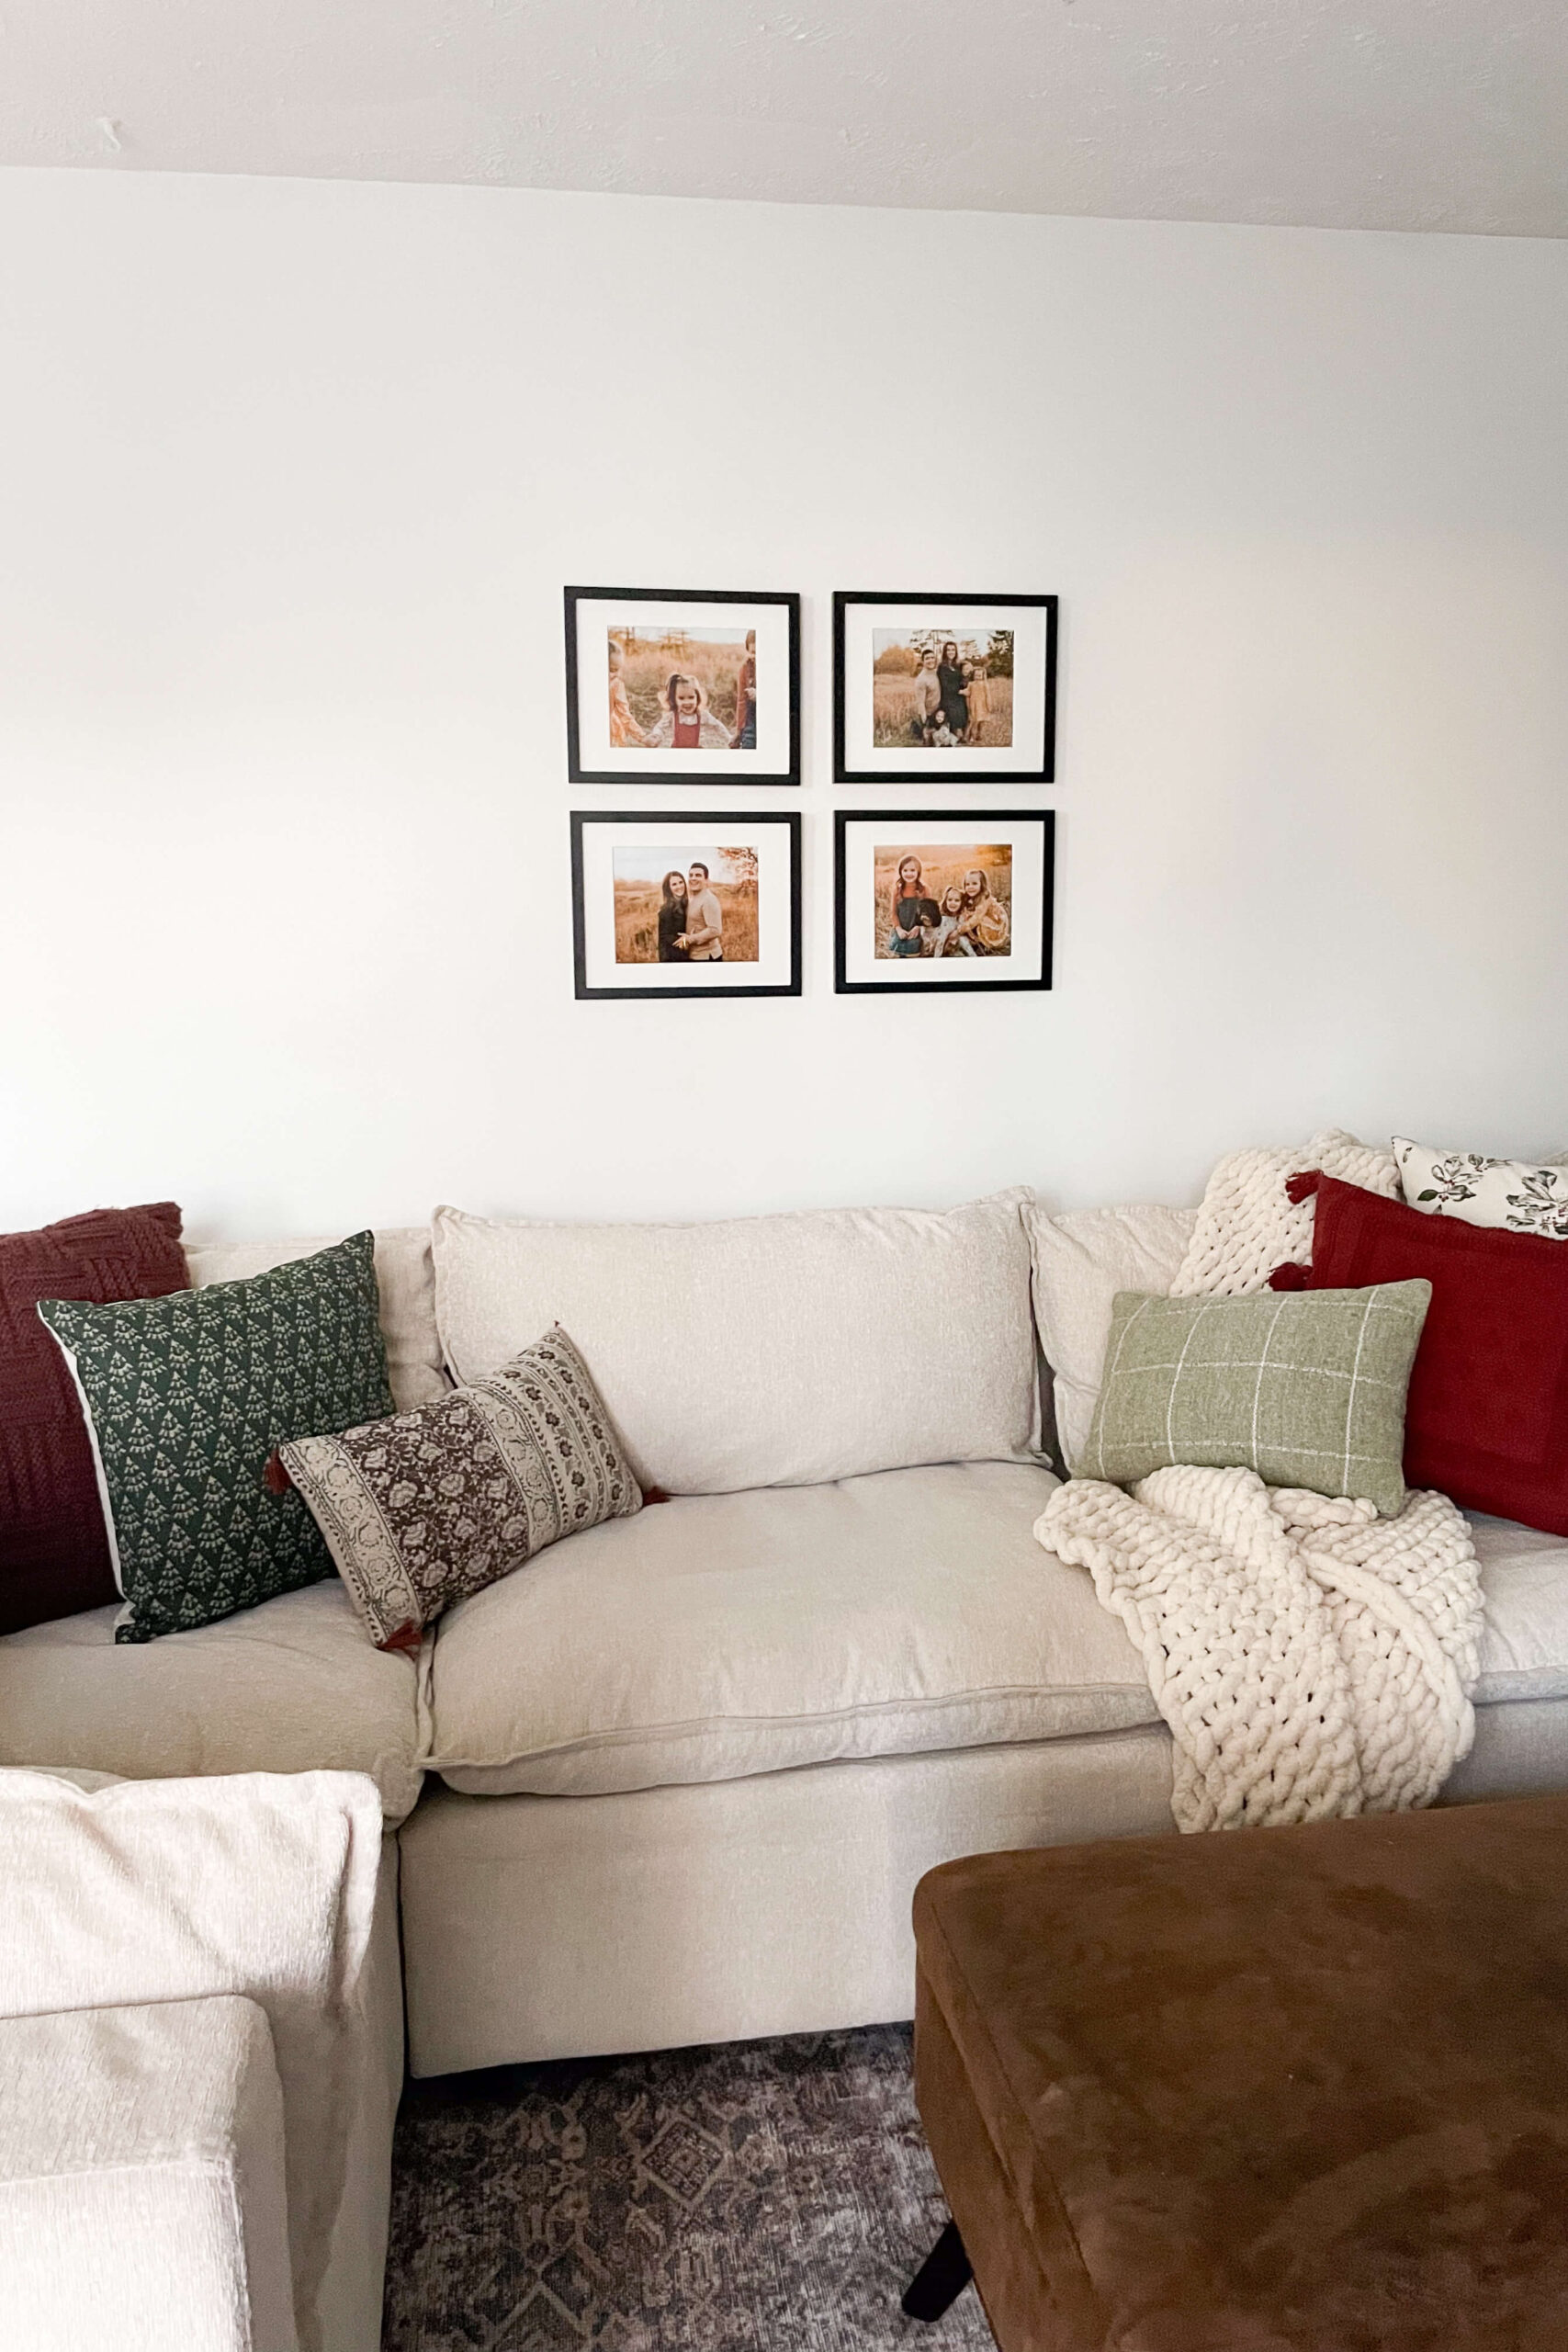 Small gallery wall over a couch.